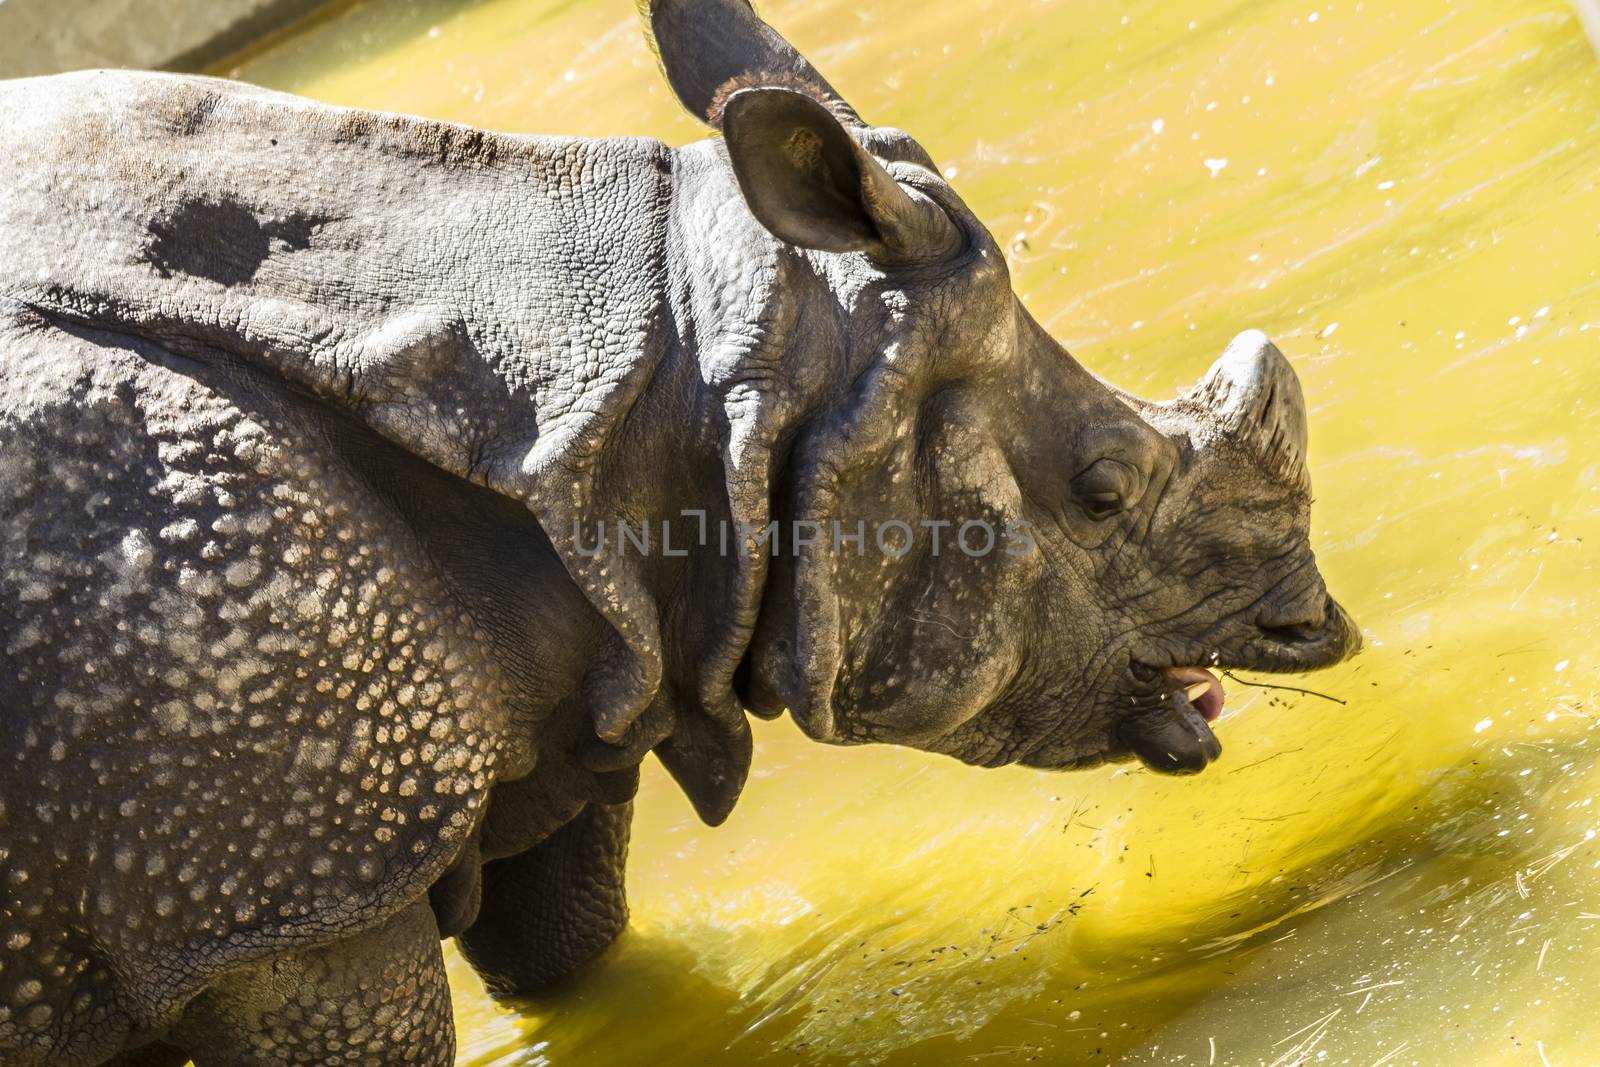 Indian rhino with huge horn and armor skin by FernandoCortes